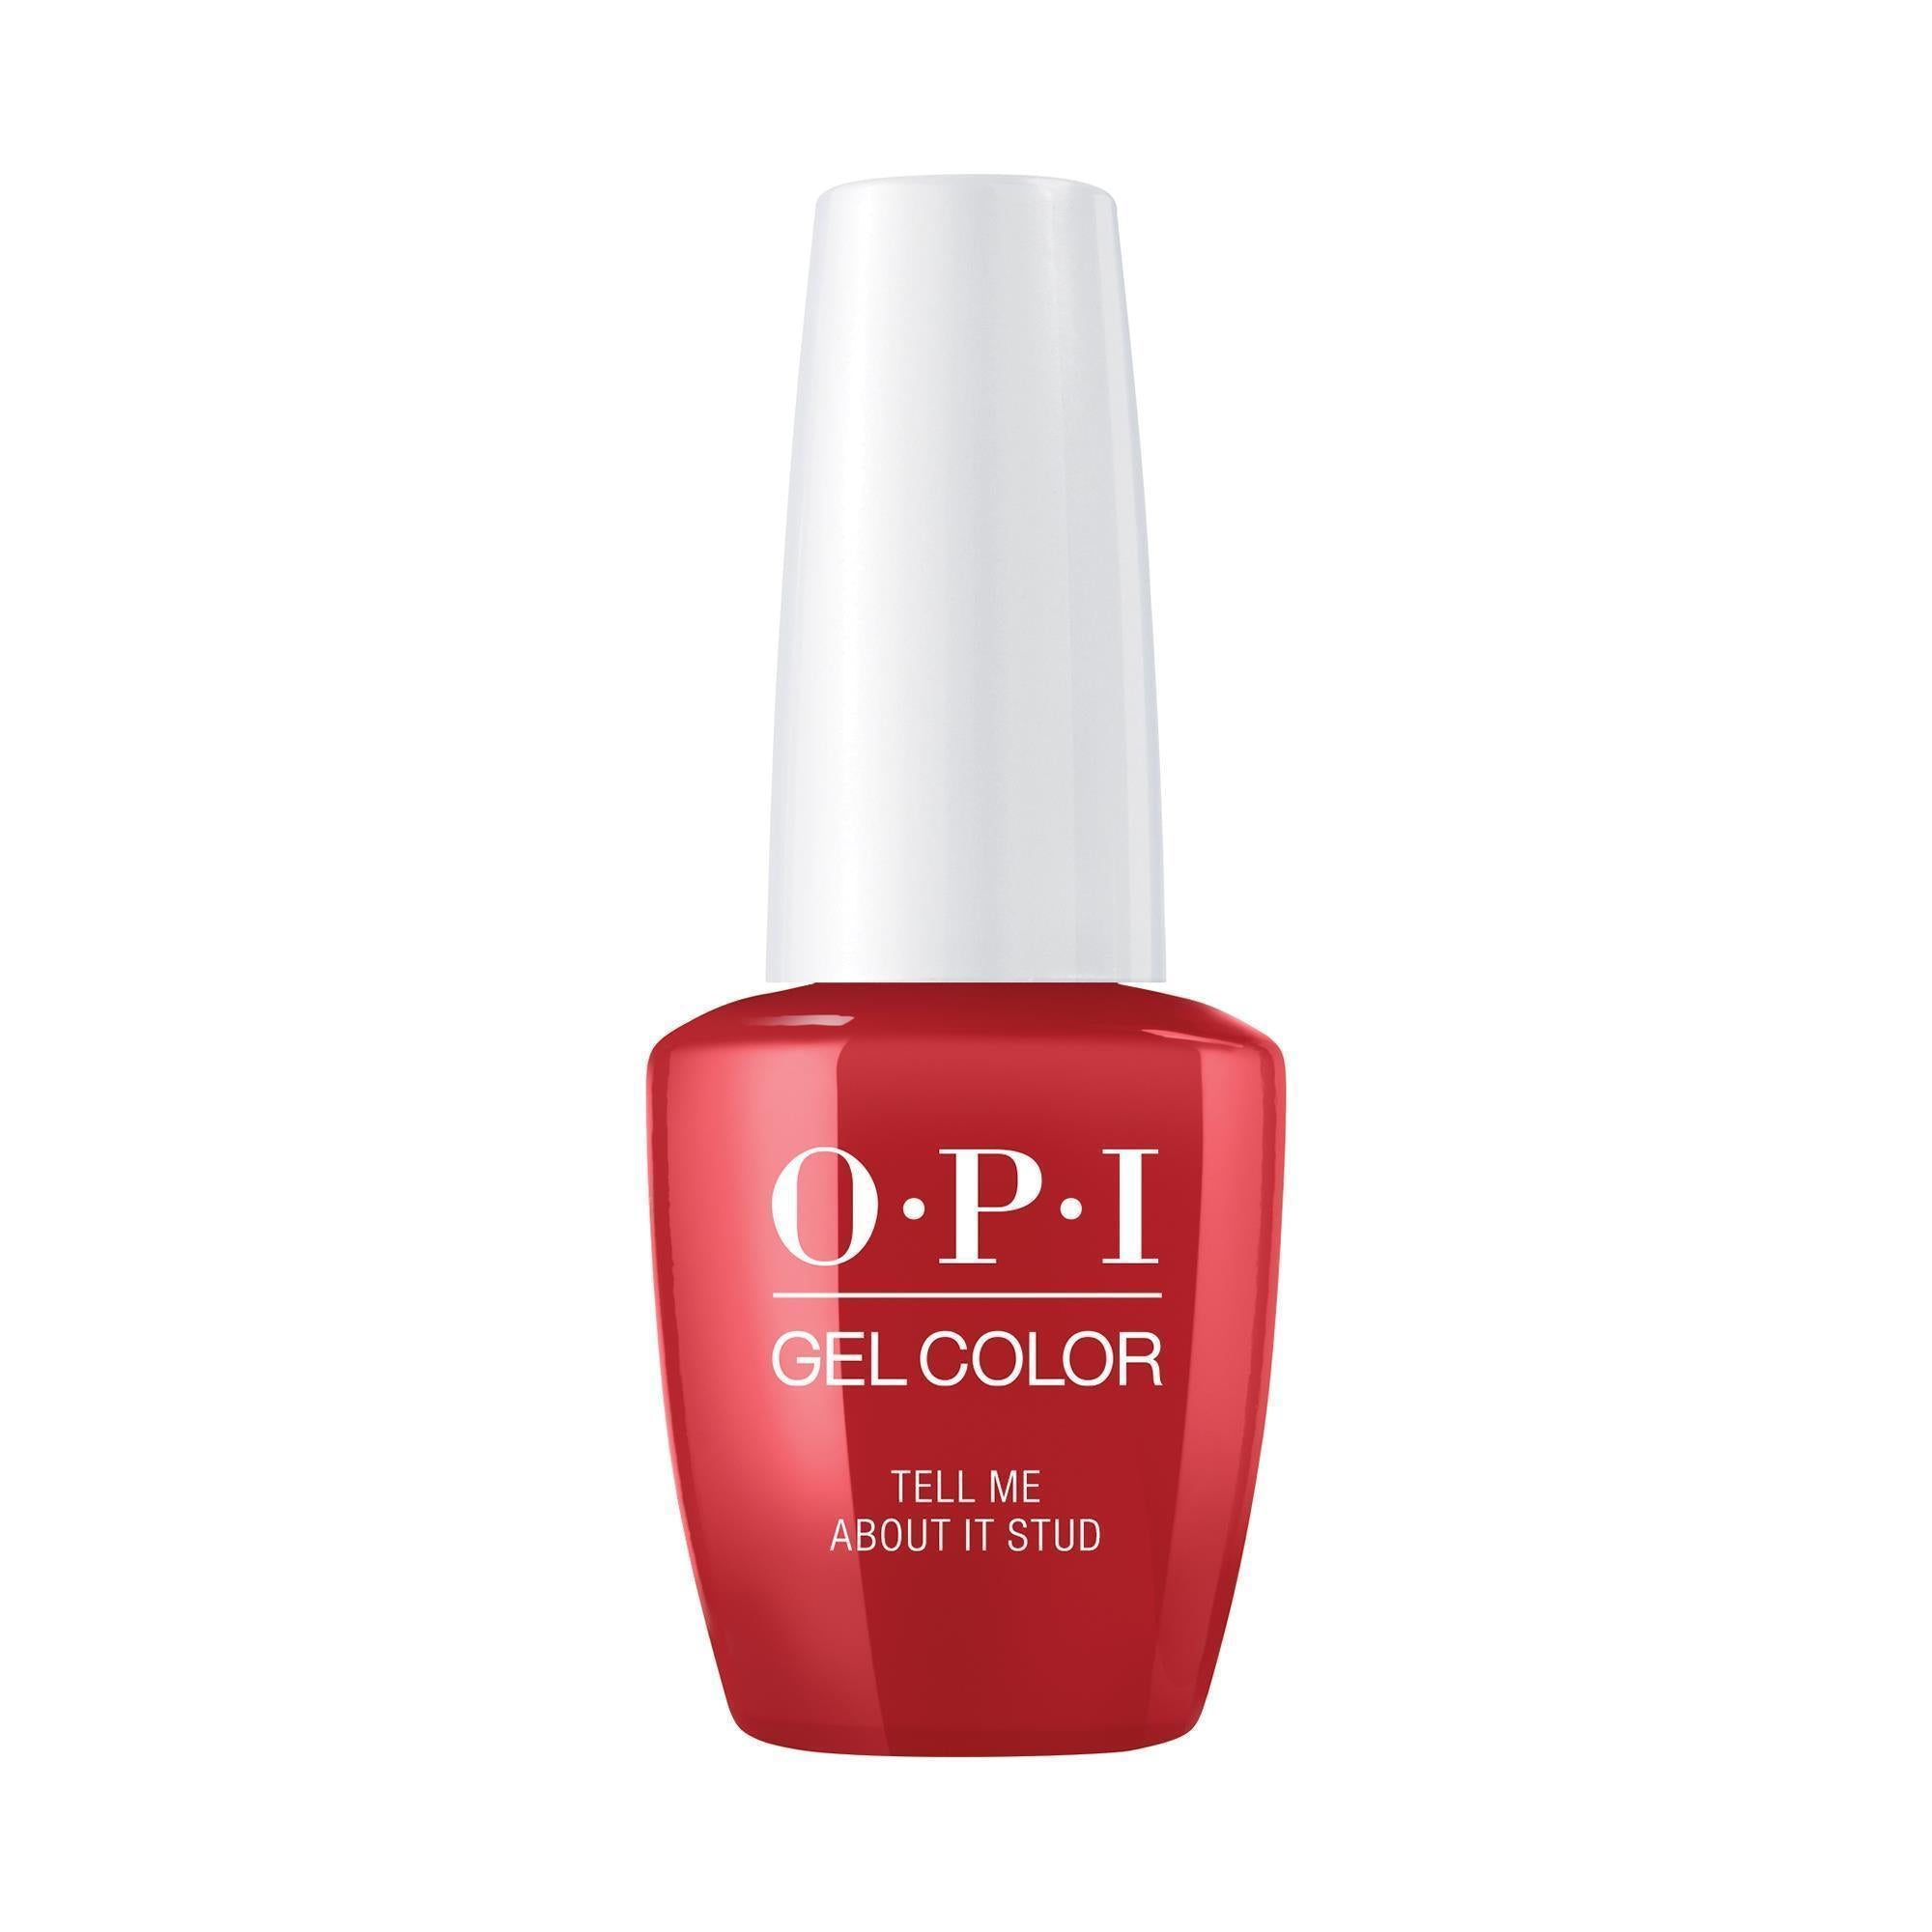 Nail Lacquer & Polish Tell Me About It Stud OPI Grease Collection/Gel